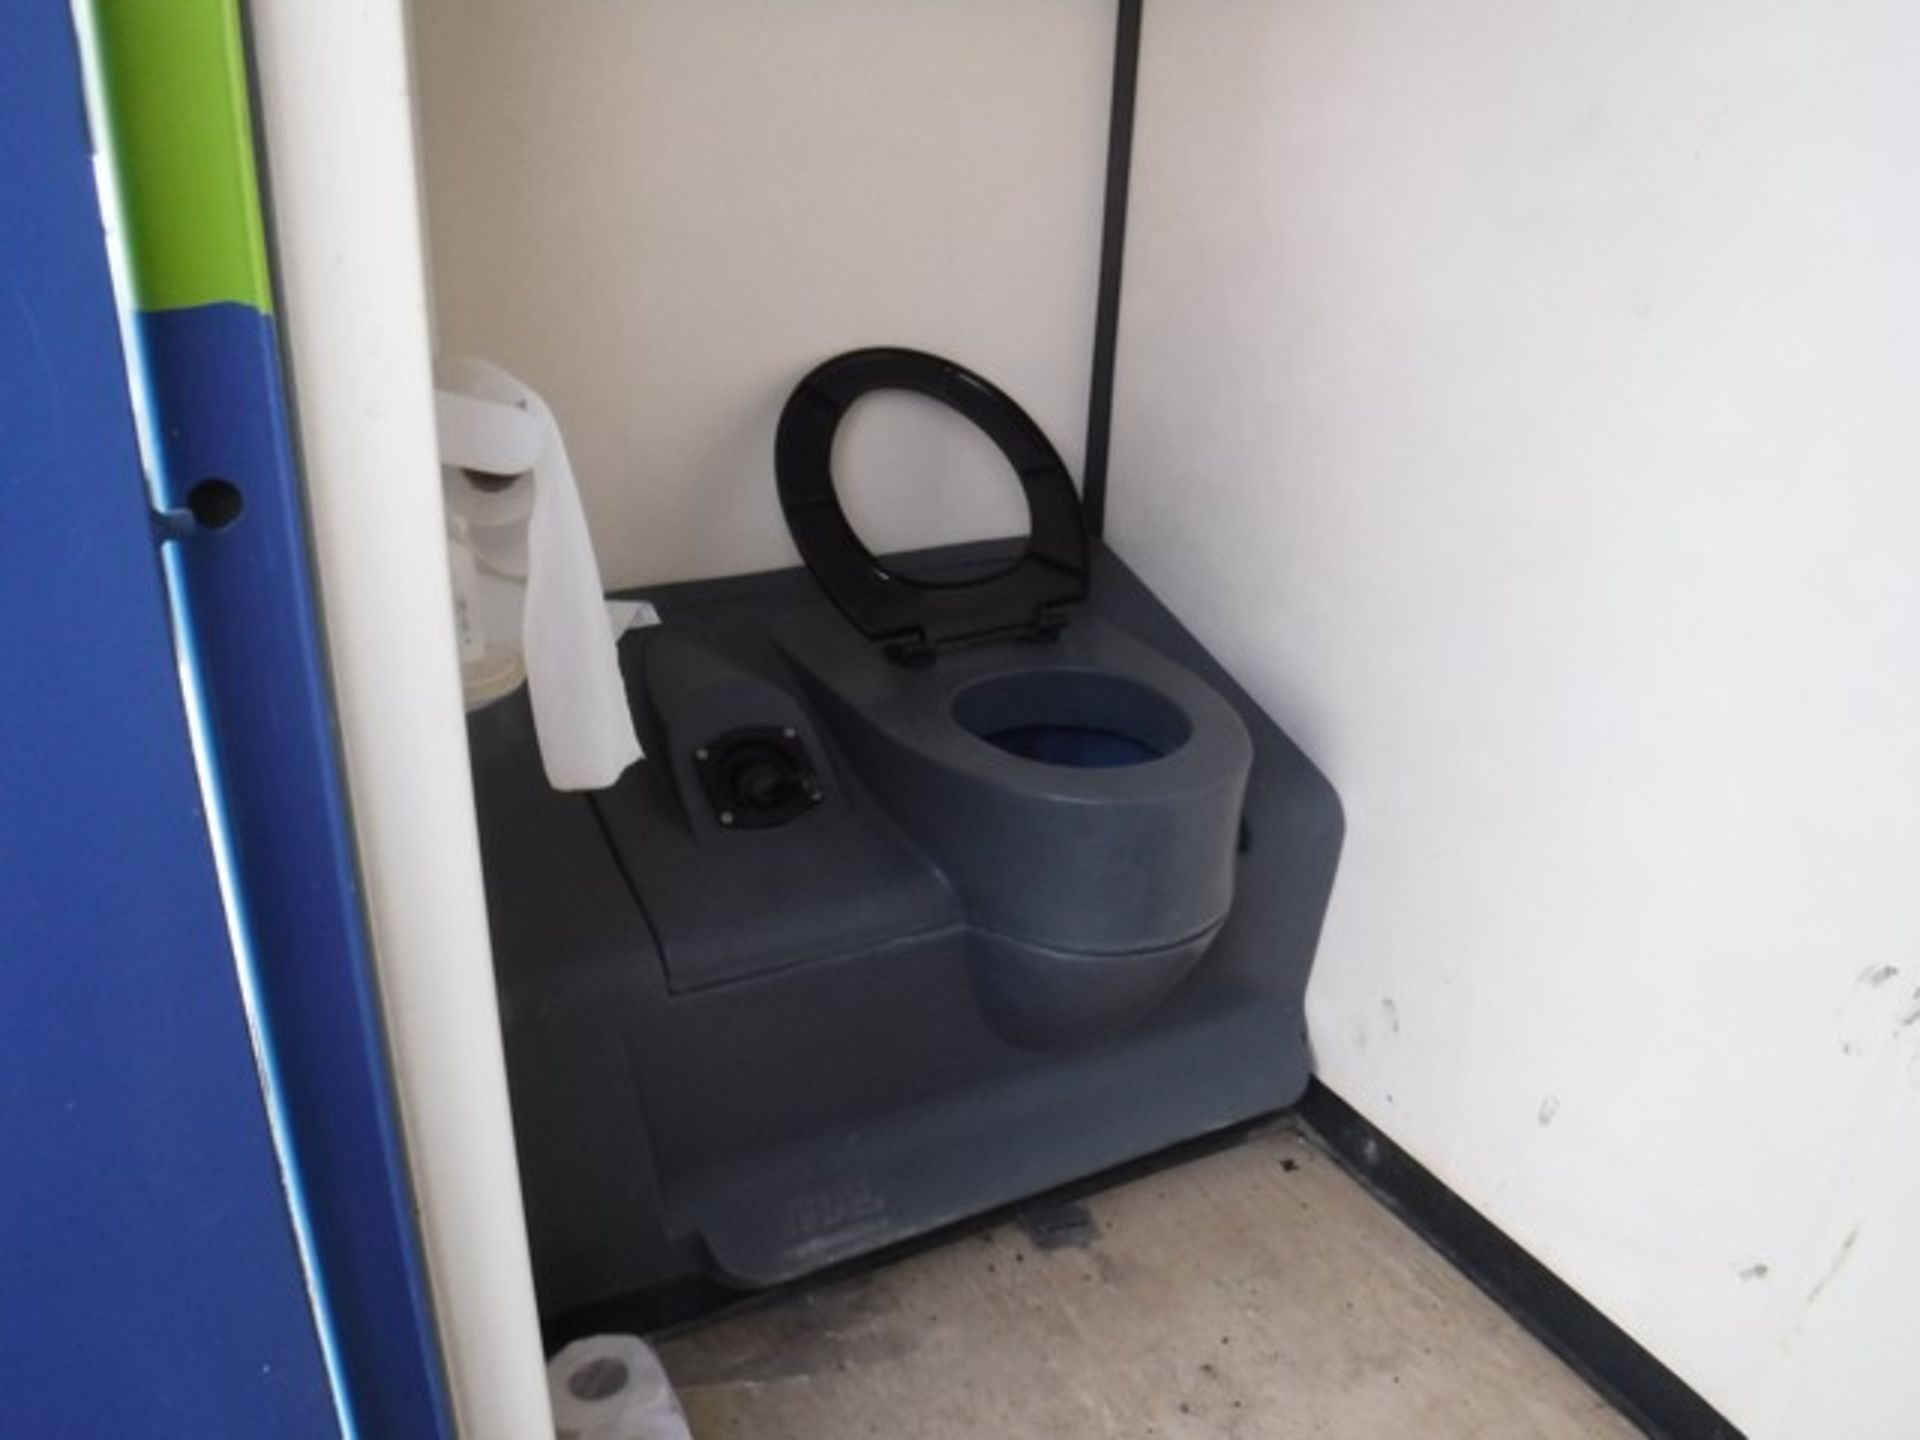 INTEGRA 32 x 10FT ANTI VANDAL UNIT C/W CANTEEN, DRYING ROOM AND END TOILET - Image 6 of 8